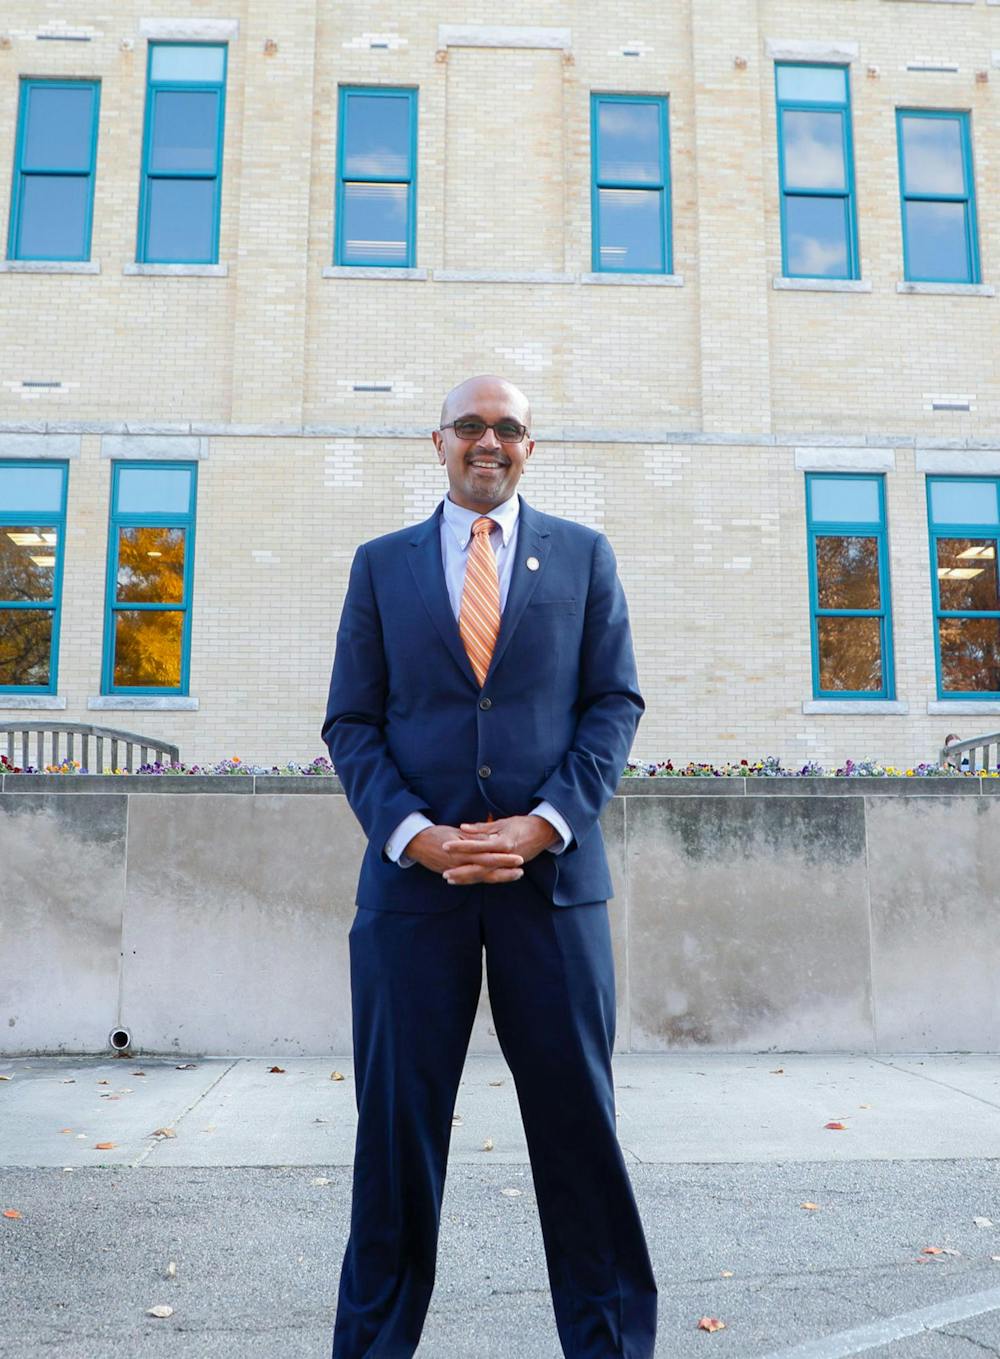 Dr. Anand Marri aims to use his position as Provost to support students across campus